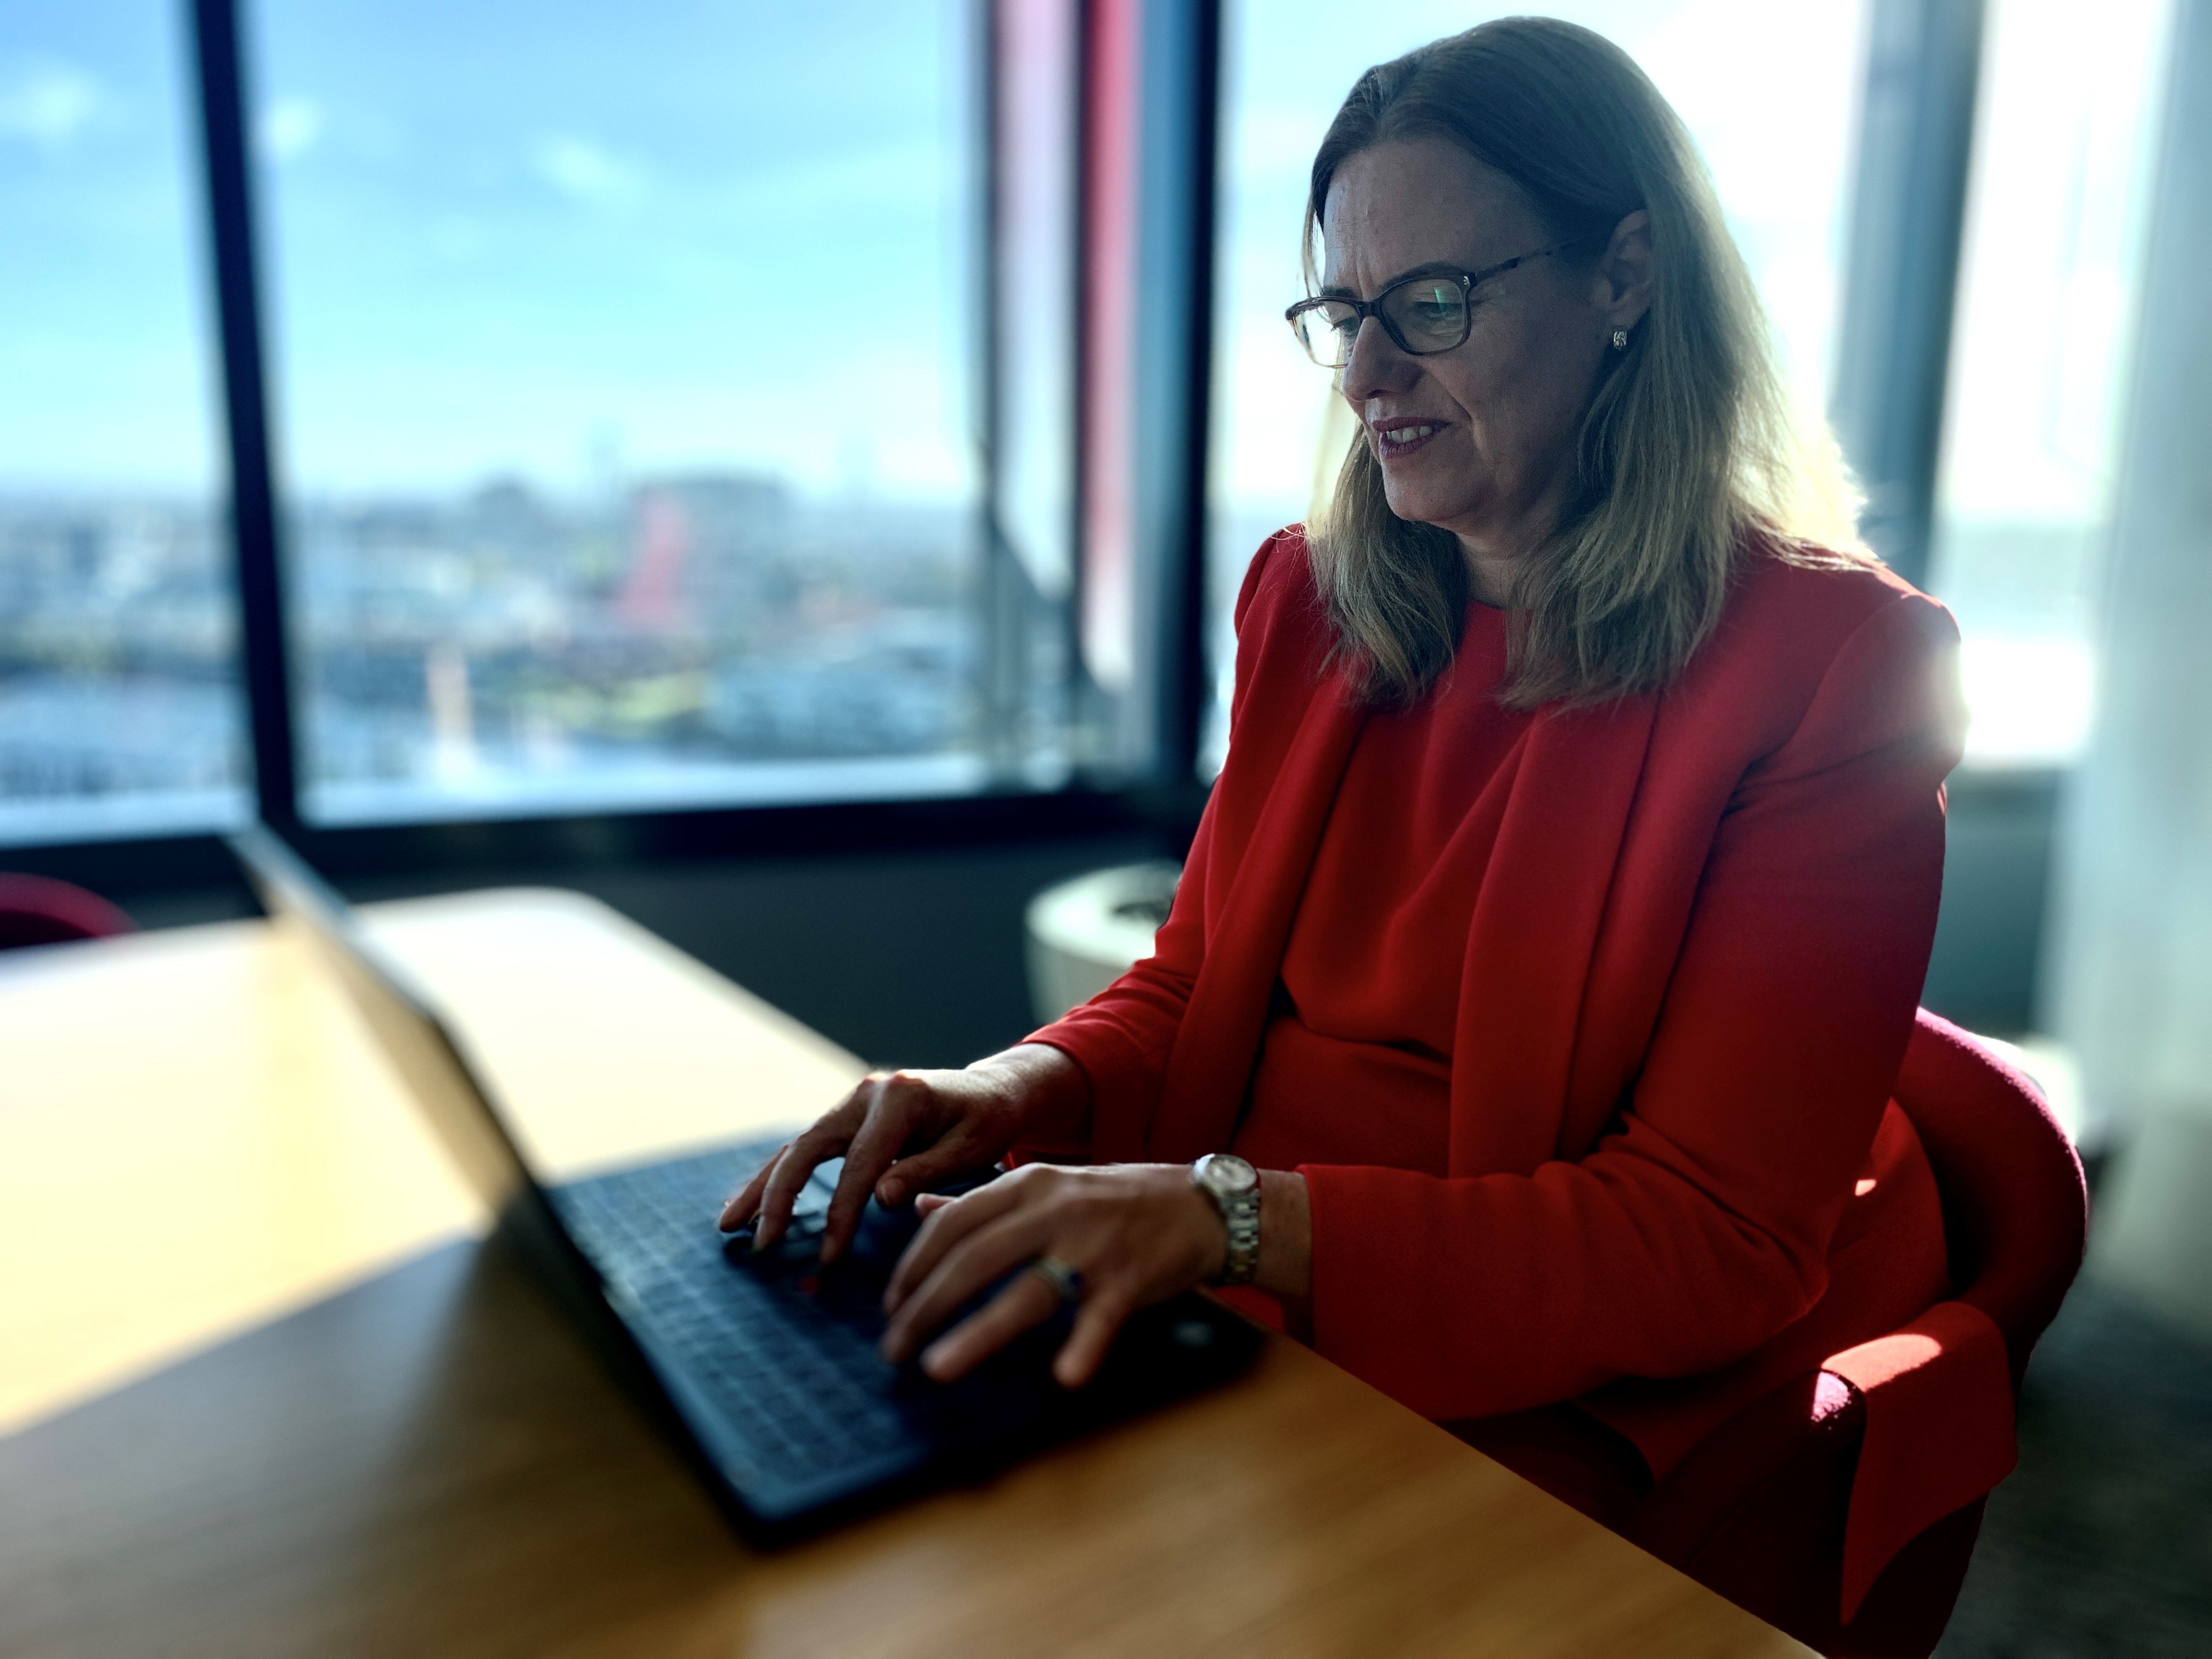 A woman in a red suit types on a laptop